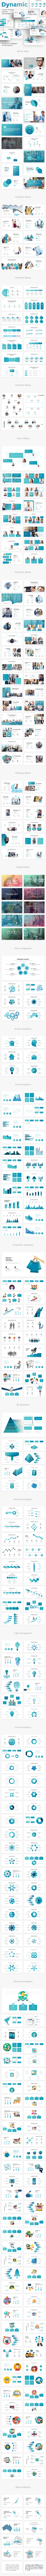 Dynamic Pitch Deck Powerpoint Template